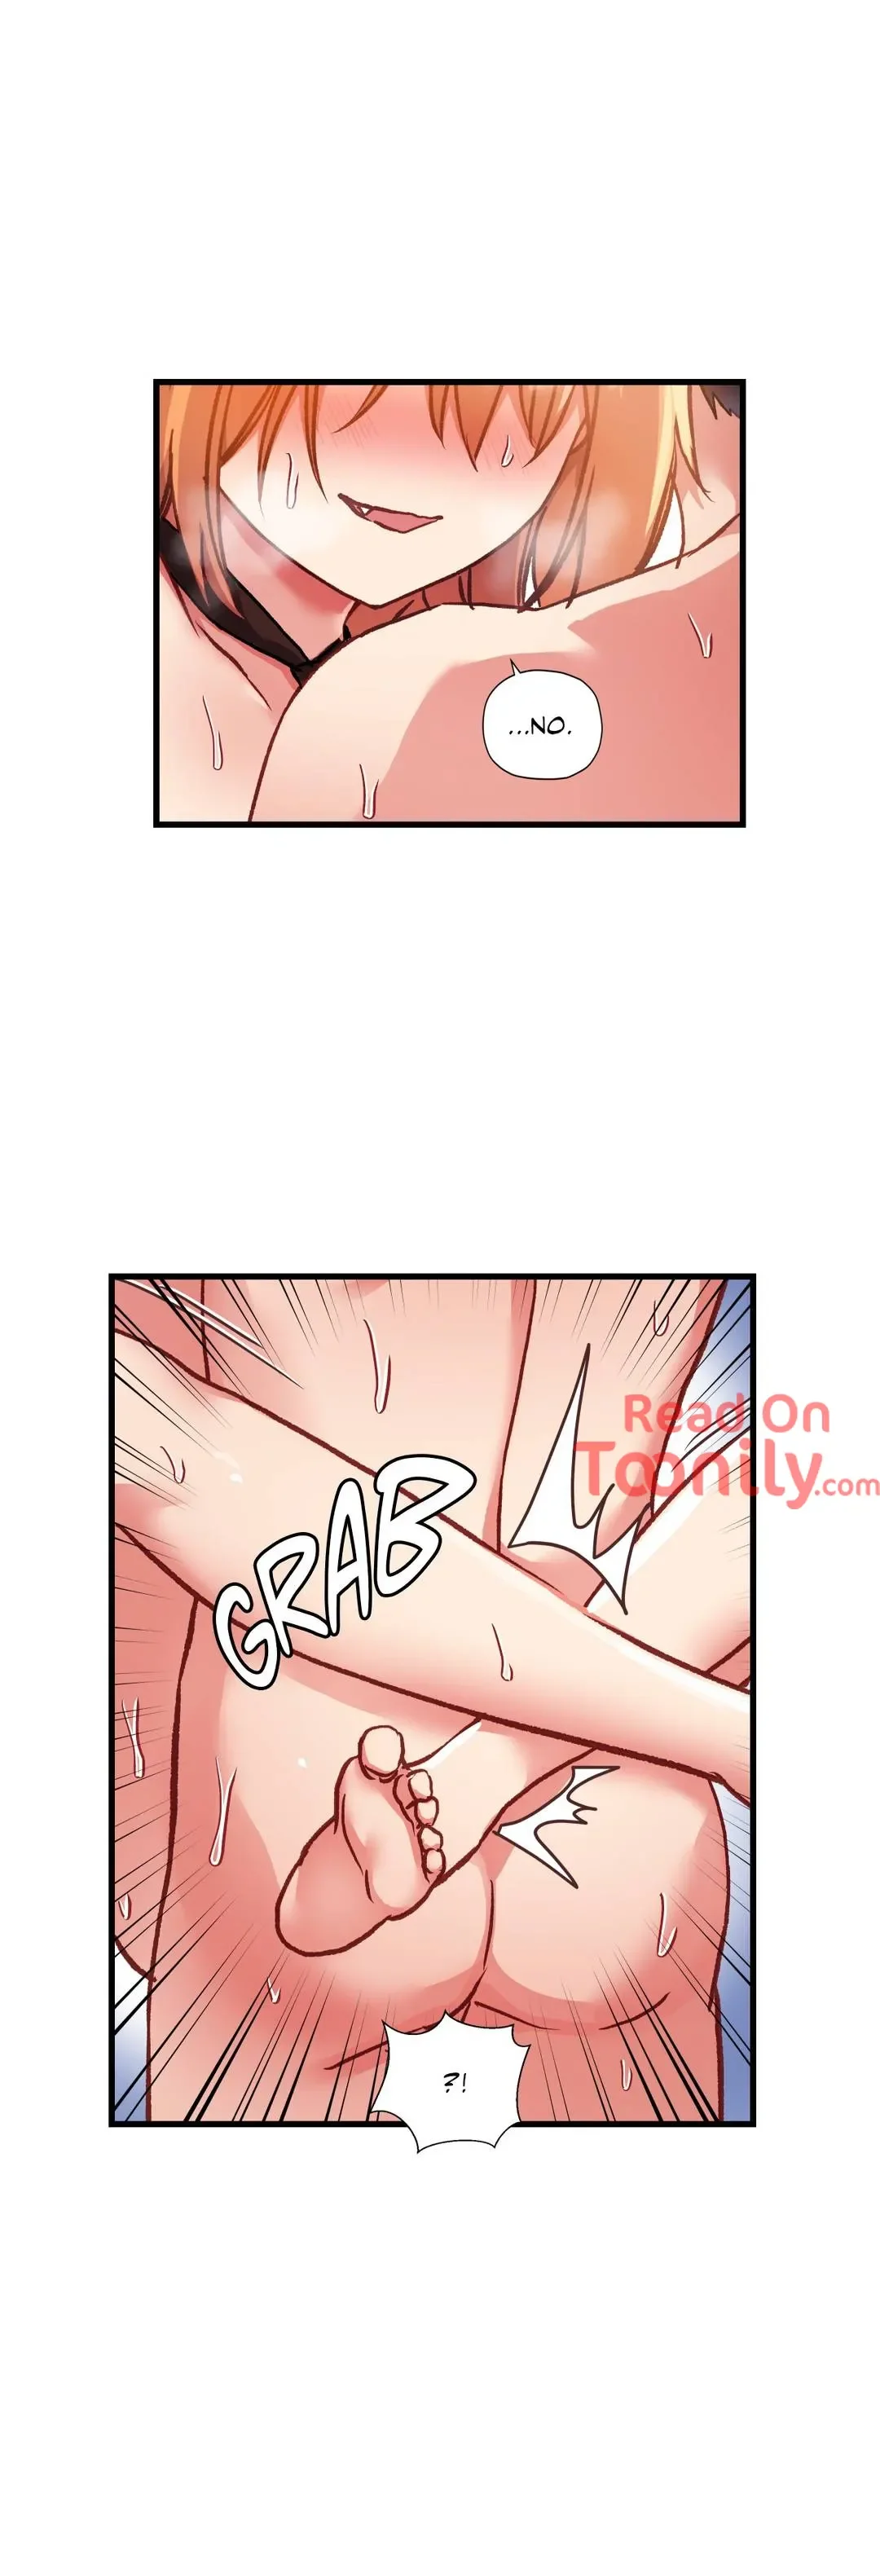 under-observation-my-first-loves-and-i-chap-49-6